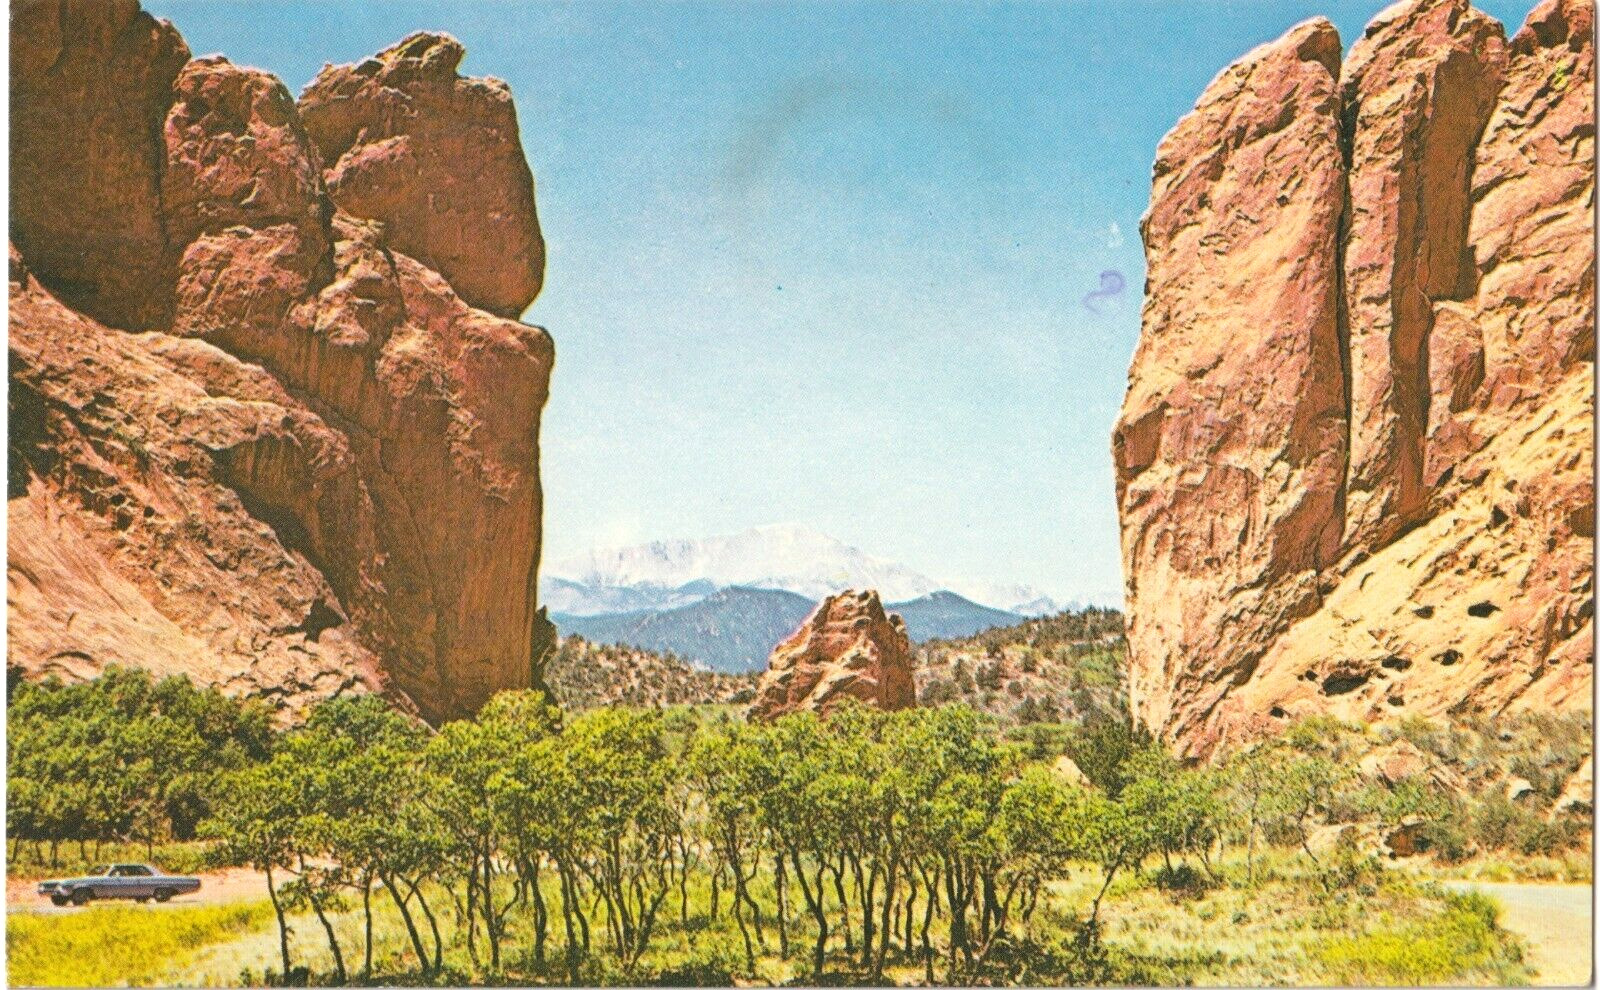 Pikes Peak from Garden of the Gods-Colorado Springs, CO-1975 posted vintage